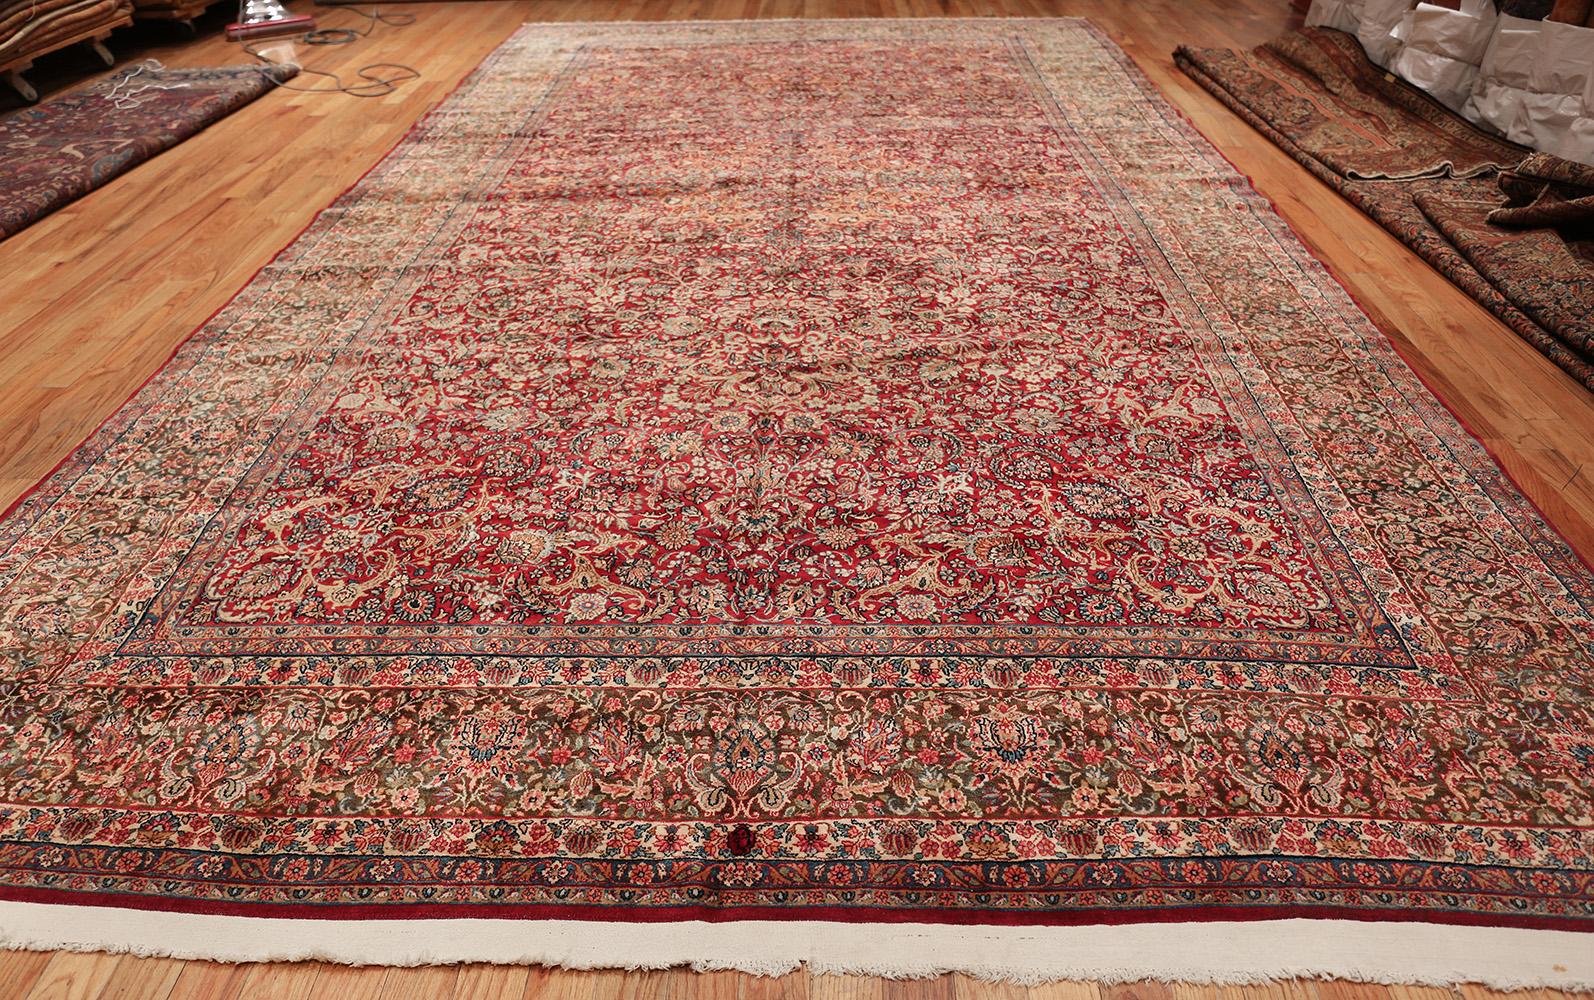 Antique Kerman, country of origin: Persia, date: circa late 19th century. Size: 9 ft 9 in x 17 ft 3 in (2.97 m x 5.26 m)

A richly articulated all-over pattern of vines and flowers sprawls lushly across the field of this sumptuous antique Persian